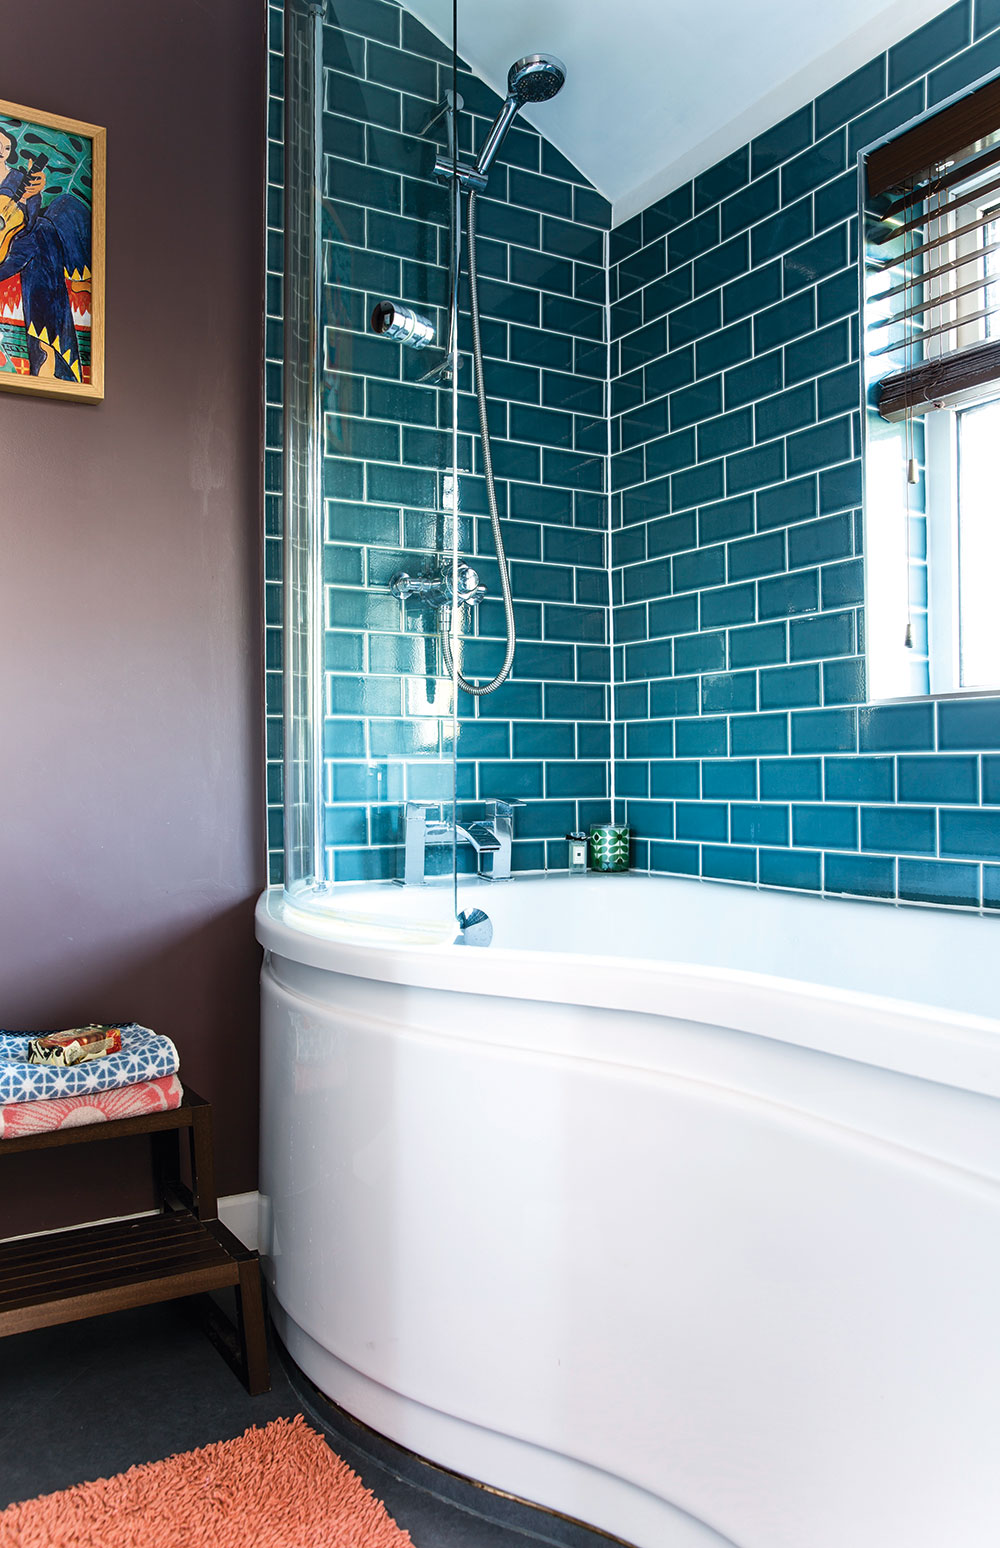 Our Bathroom, Lizzie Orme for Your Home